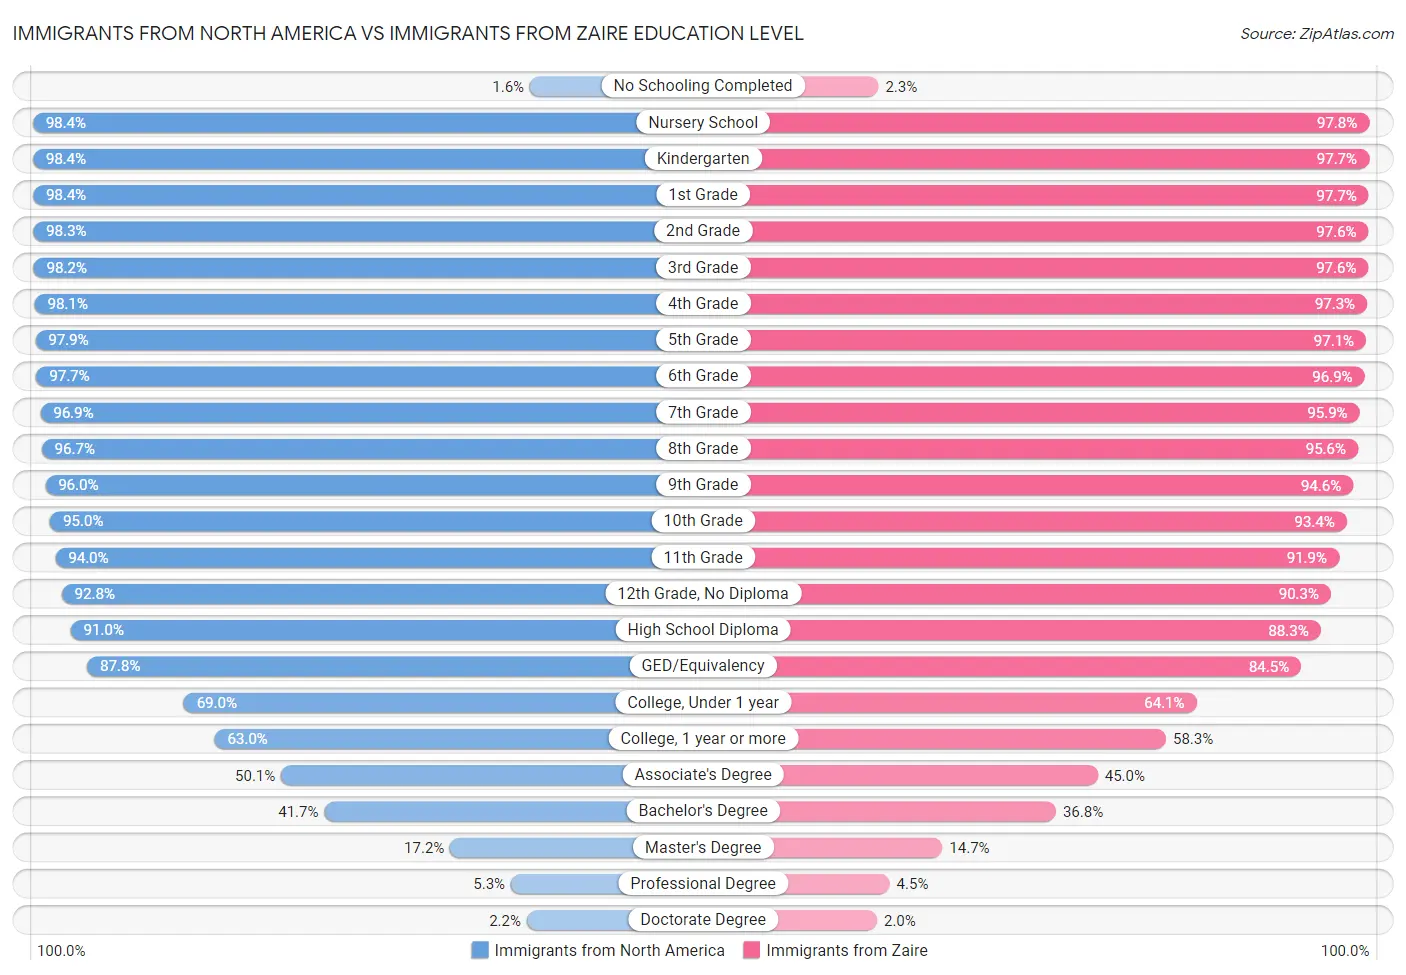 Immigrants from North America vs Immigrants from Zaire Education Level